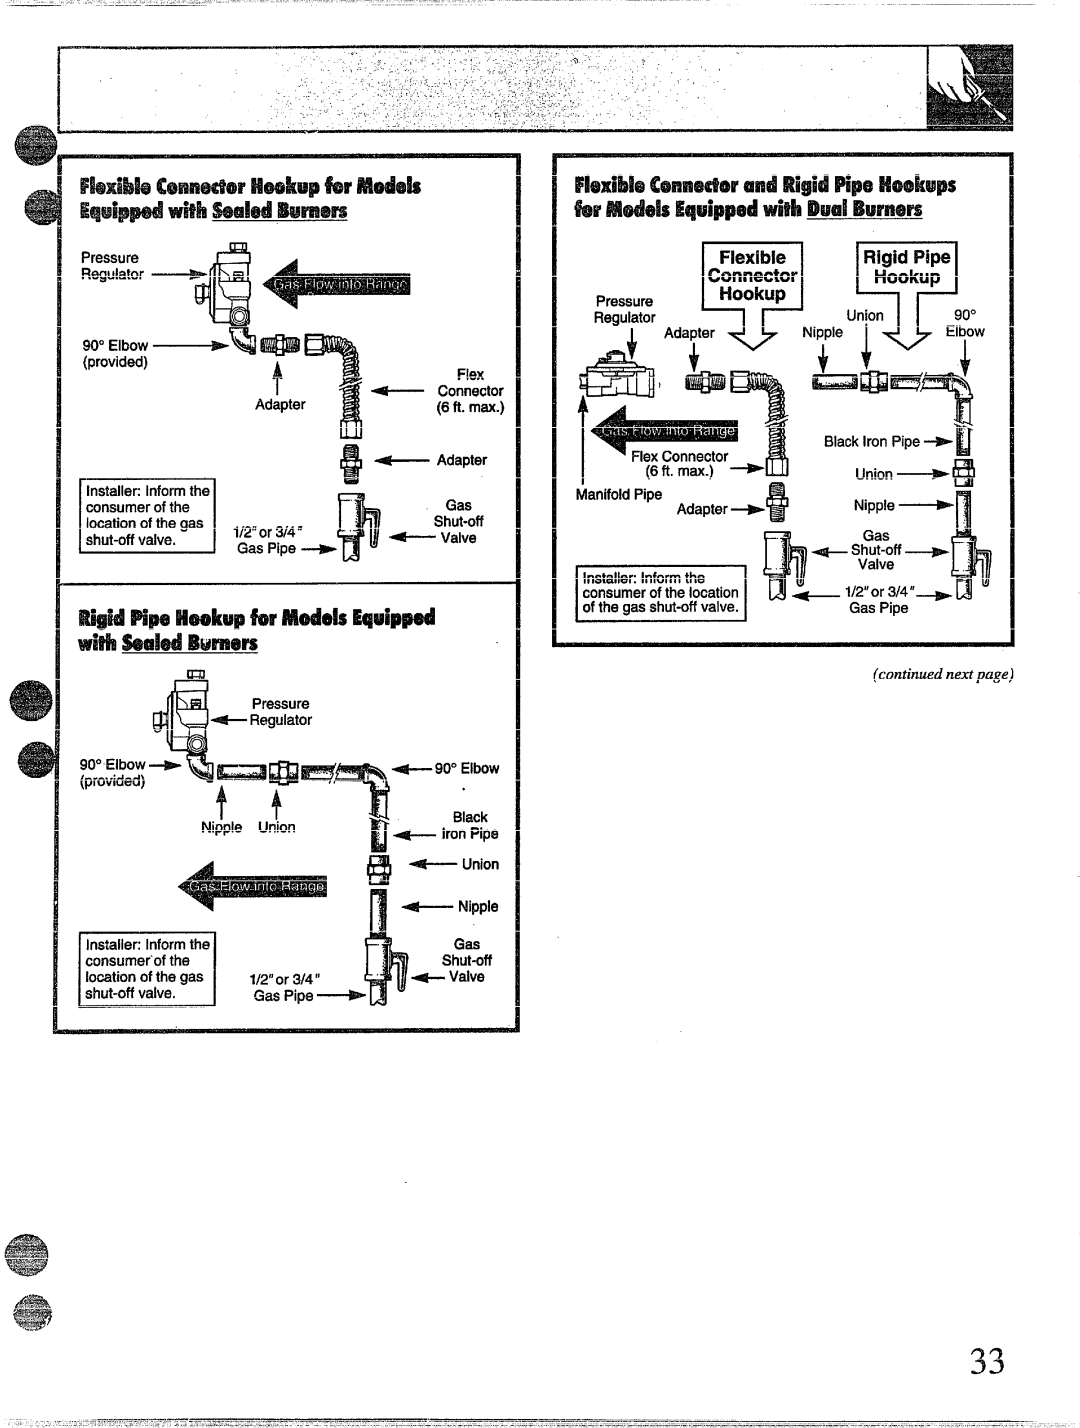 GE 49-8338 installation instructions Provided Flex ~ Connector Adapte6 ft. max 